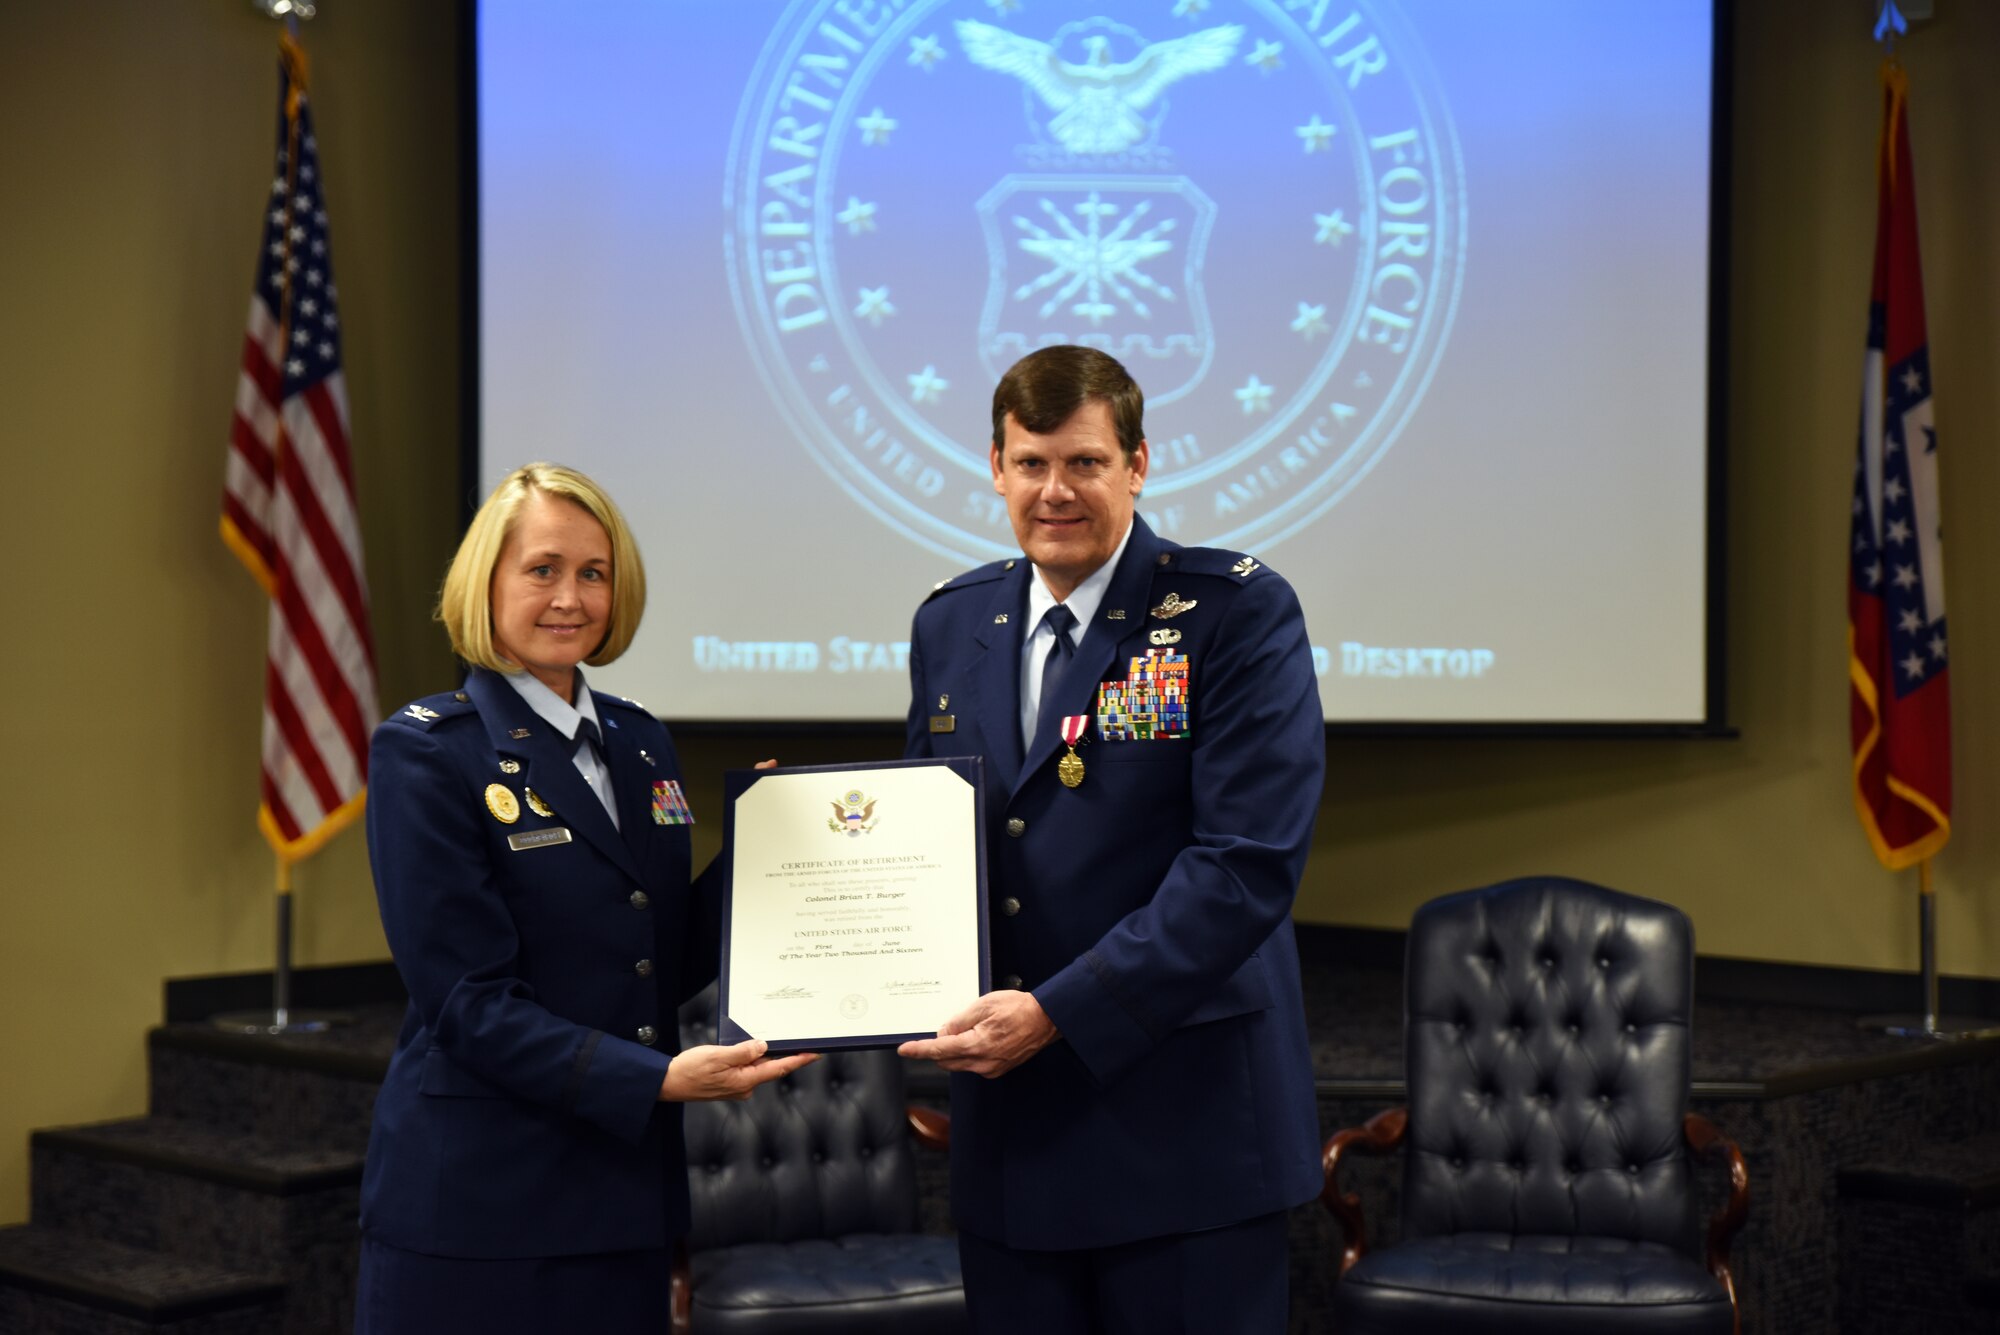 Col. Brian T. Burger, commander of the 188th Operations Group, receives his certificate of retirement from Col. Bobbi Doorenbos, 188th Wing commander, May 15, 2016, during a formal retirement ceremony at Ebbing Air National Guard Base, Fort Smith, Ark. As a command pilot, Burger logged more than 6,100 hours of military flight during his 30 year career in numerous aircraft, including the A-10C Thunderbolt II Warthog, the wing's last aircraft. (U.S. Air National Guard photo by Senior Airman Cody Martin/Released)